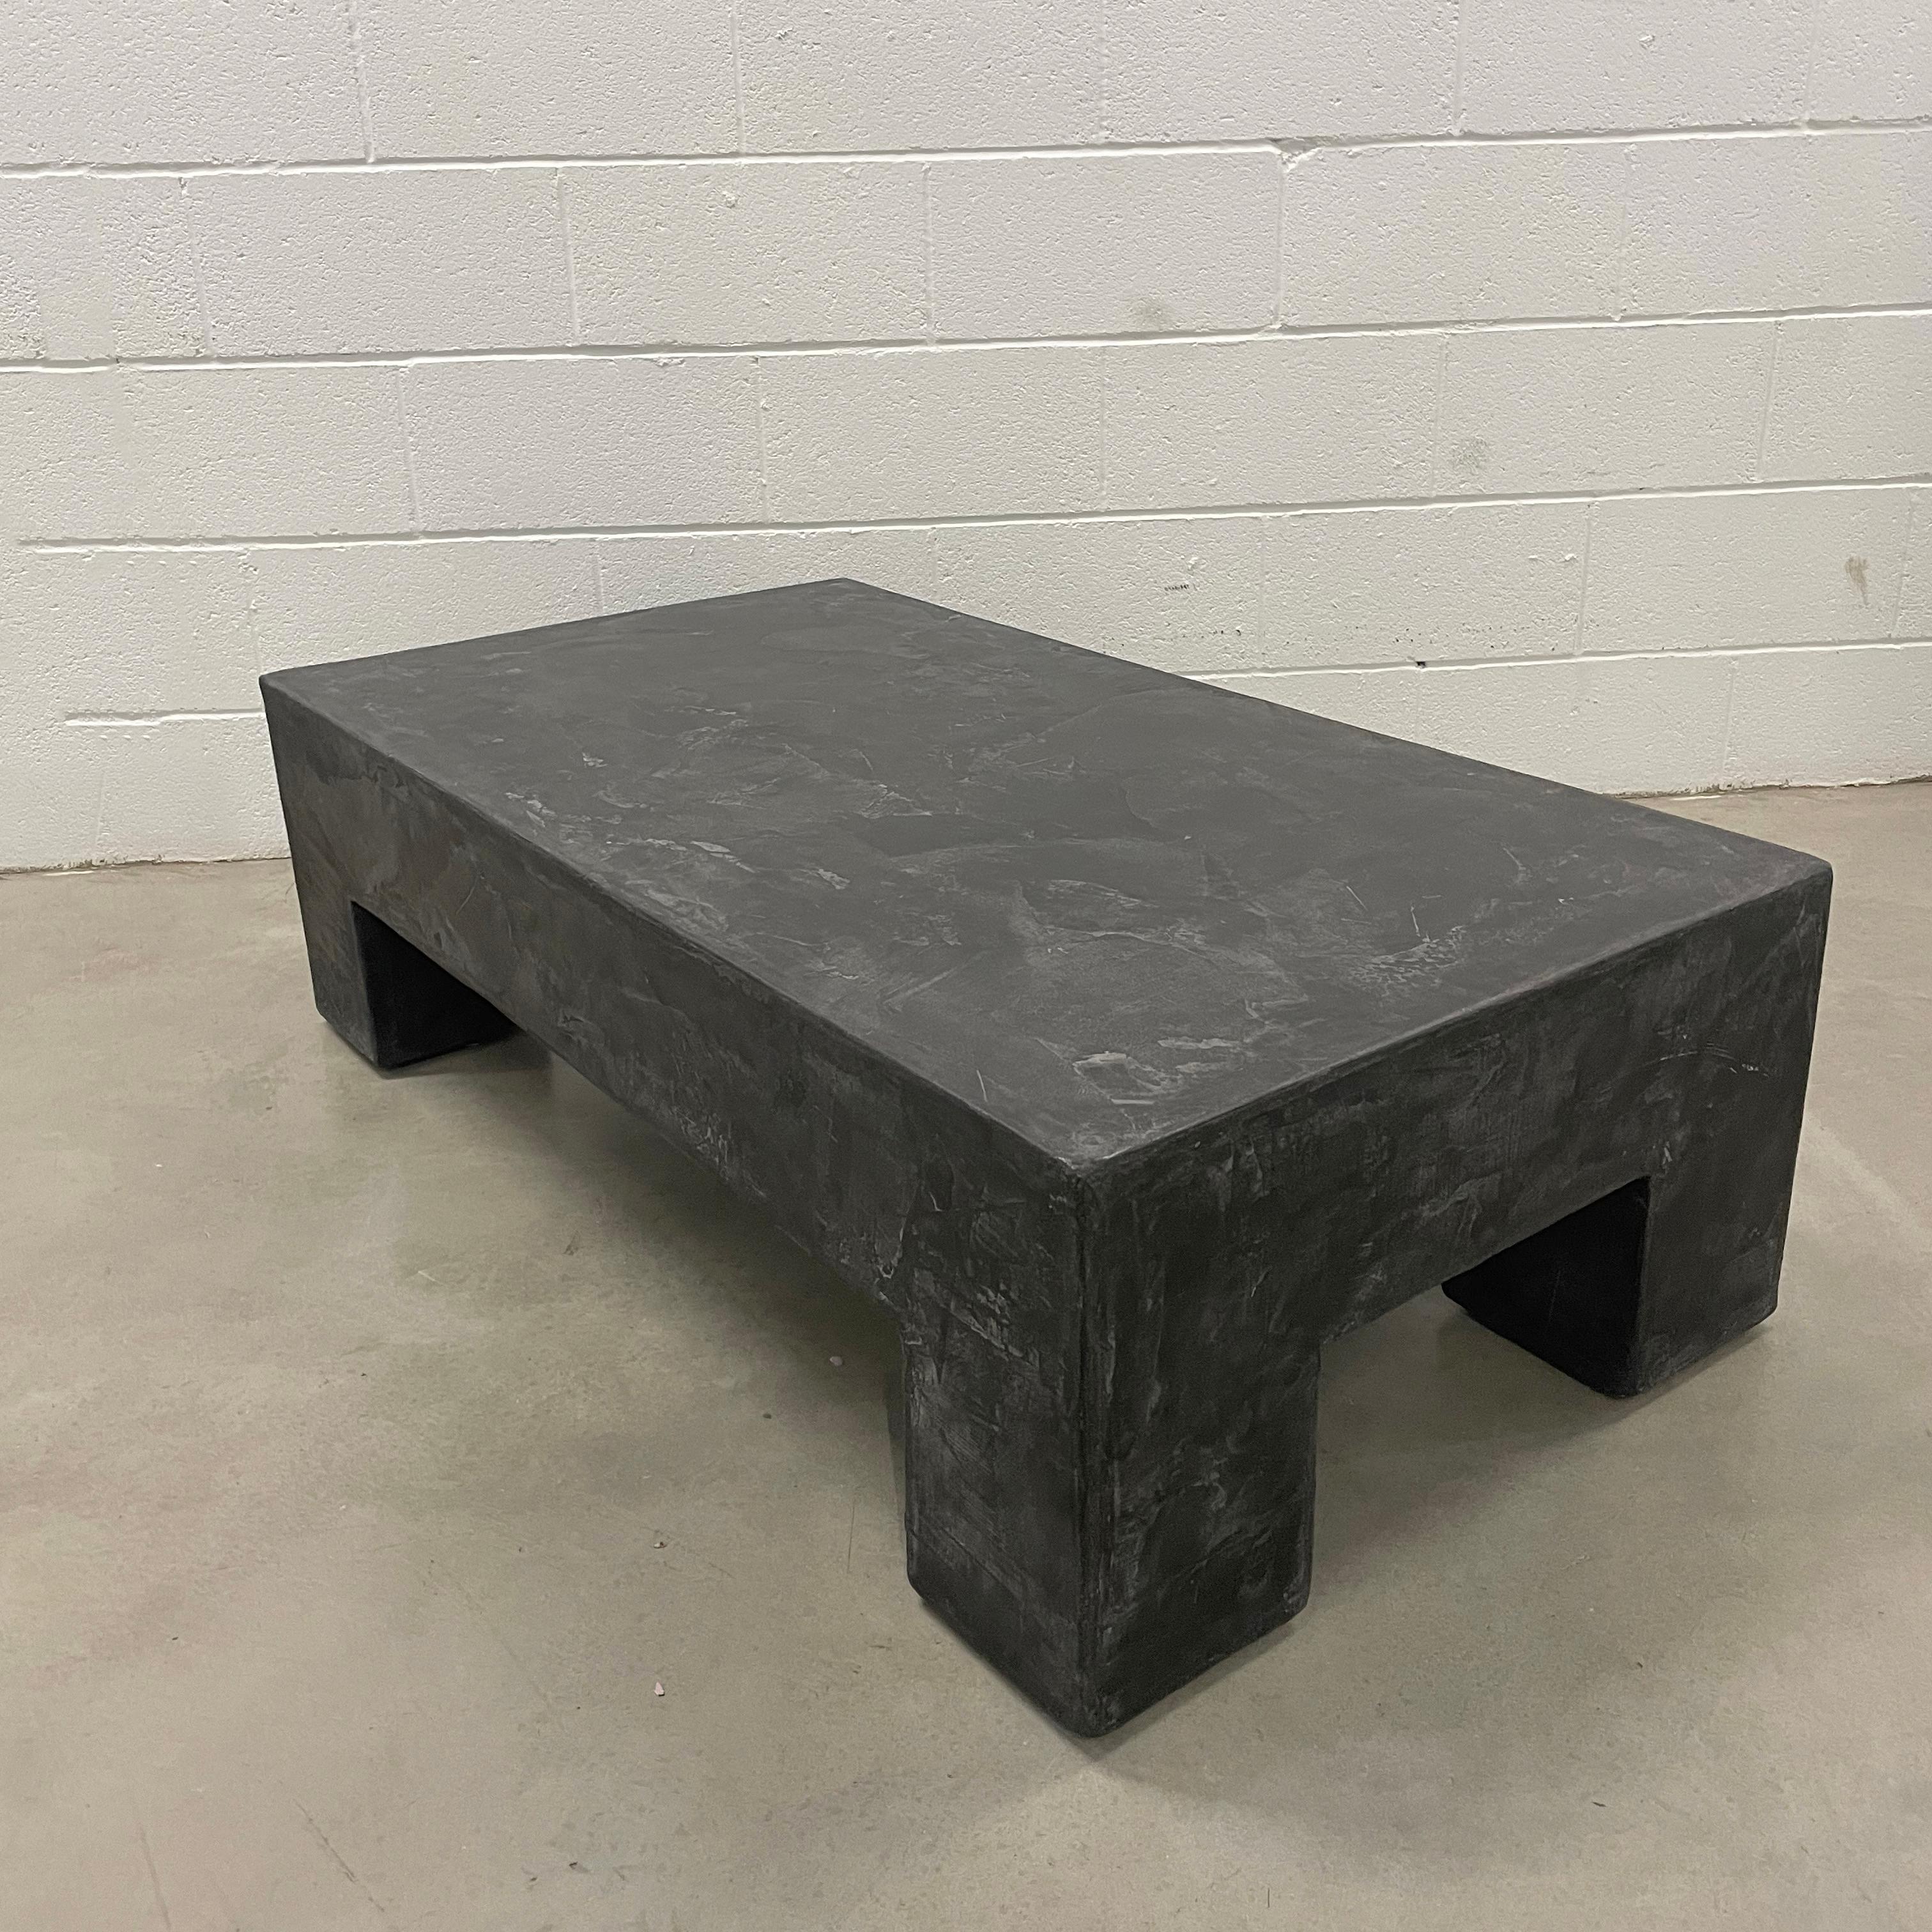 Coffee table 
Artist Alexey Krupinin

Its simple geometric shape has a durable finish and is made of wood with multiple layers of hand-trowelled Venetian plaster, creating unique silhouettes from different angles. Tooling marks and surface scratches